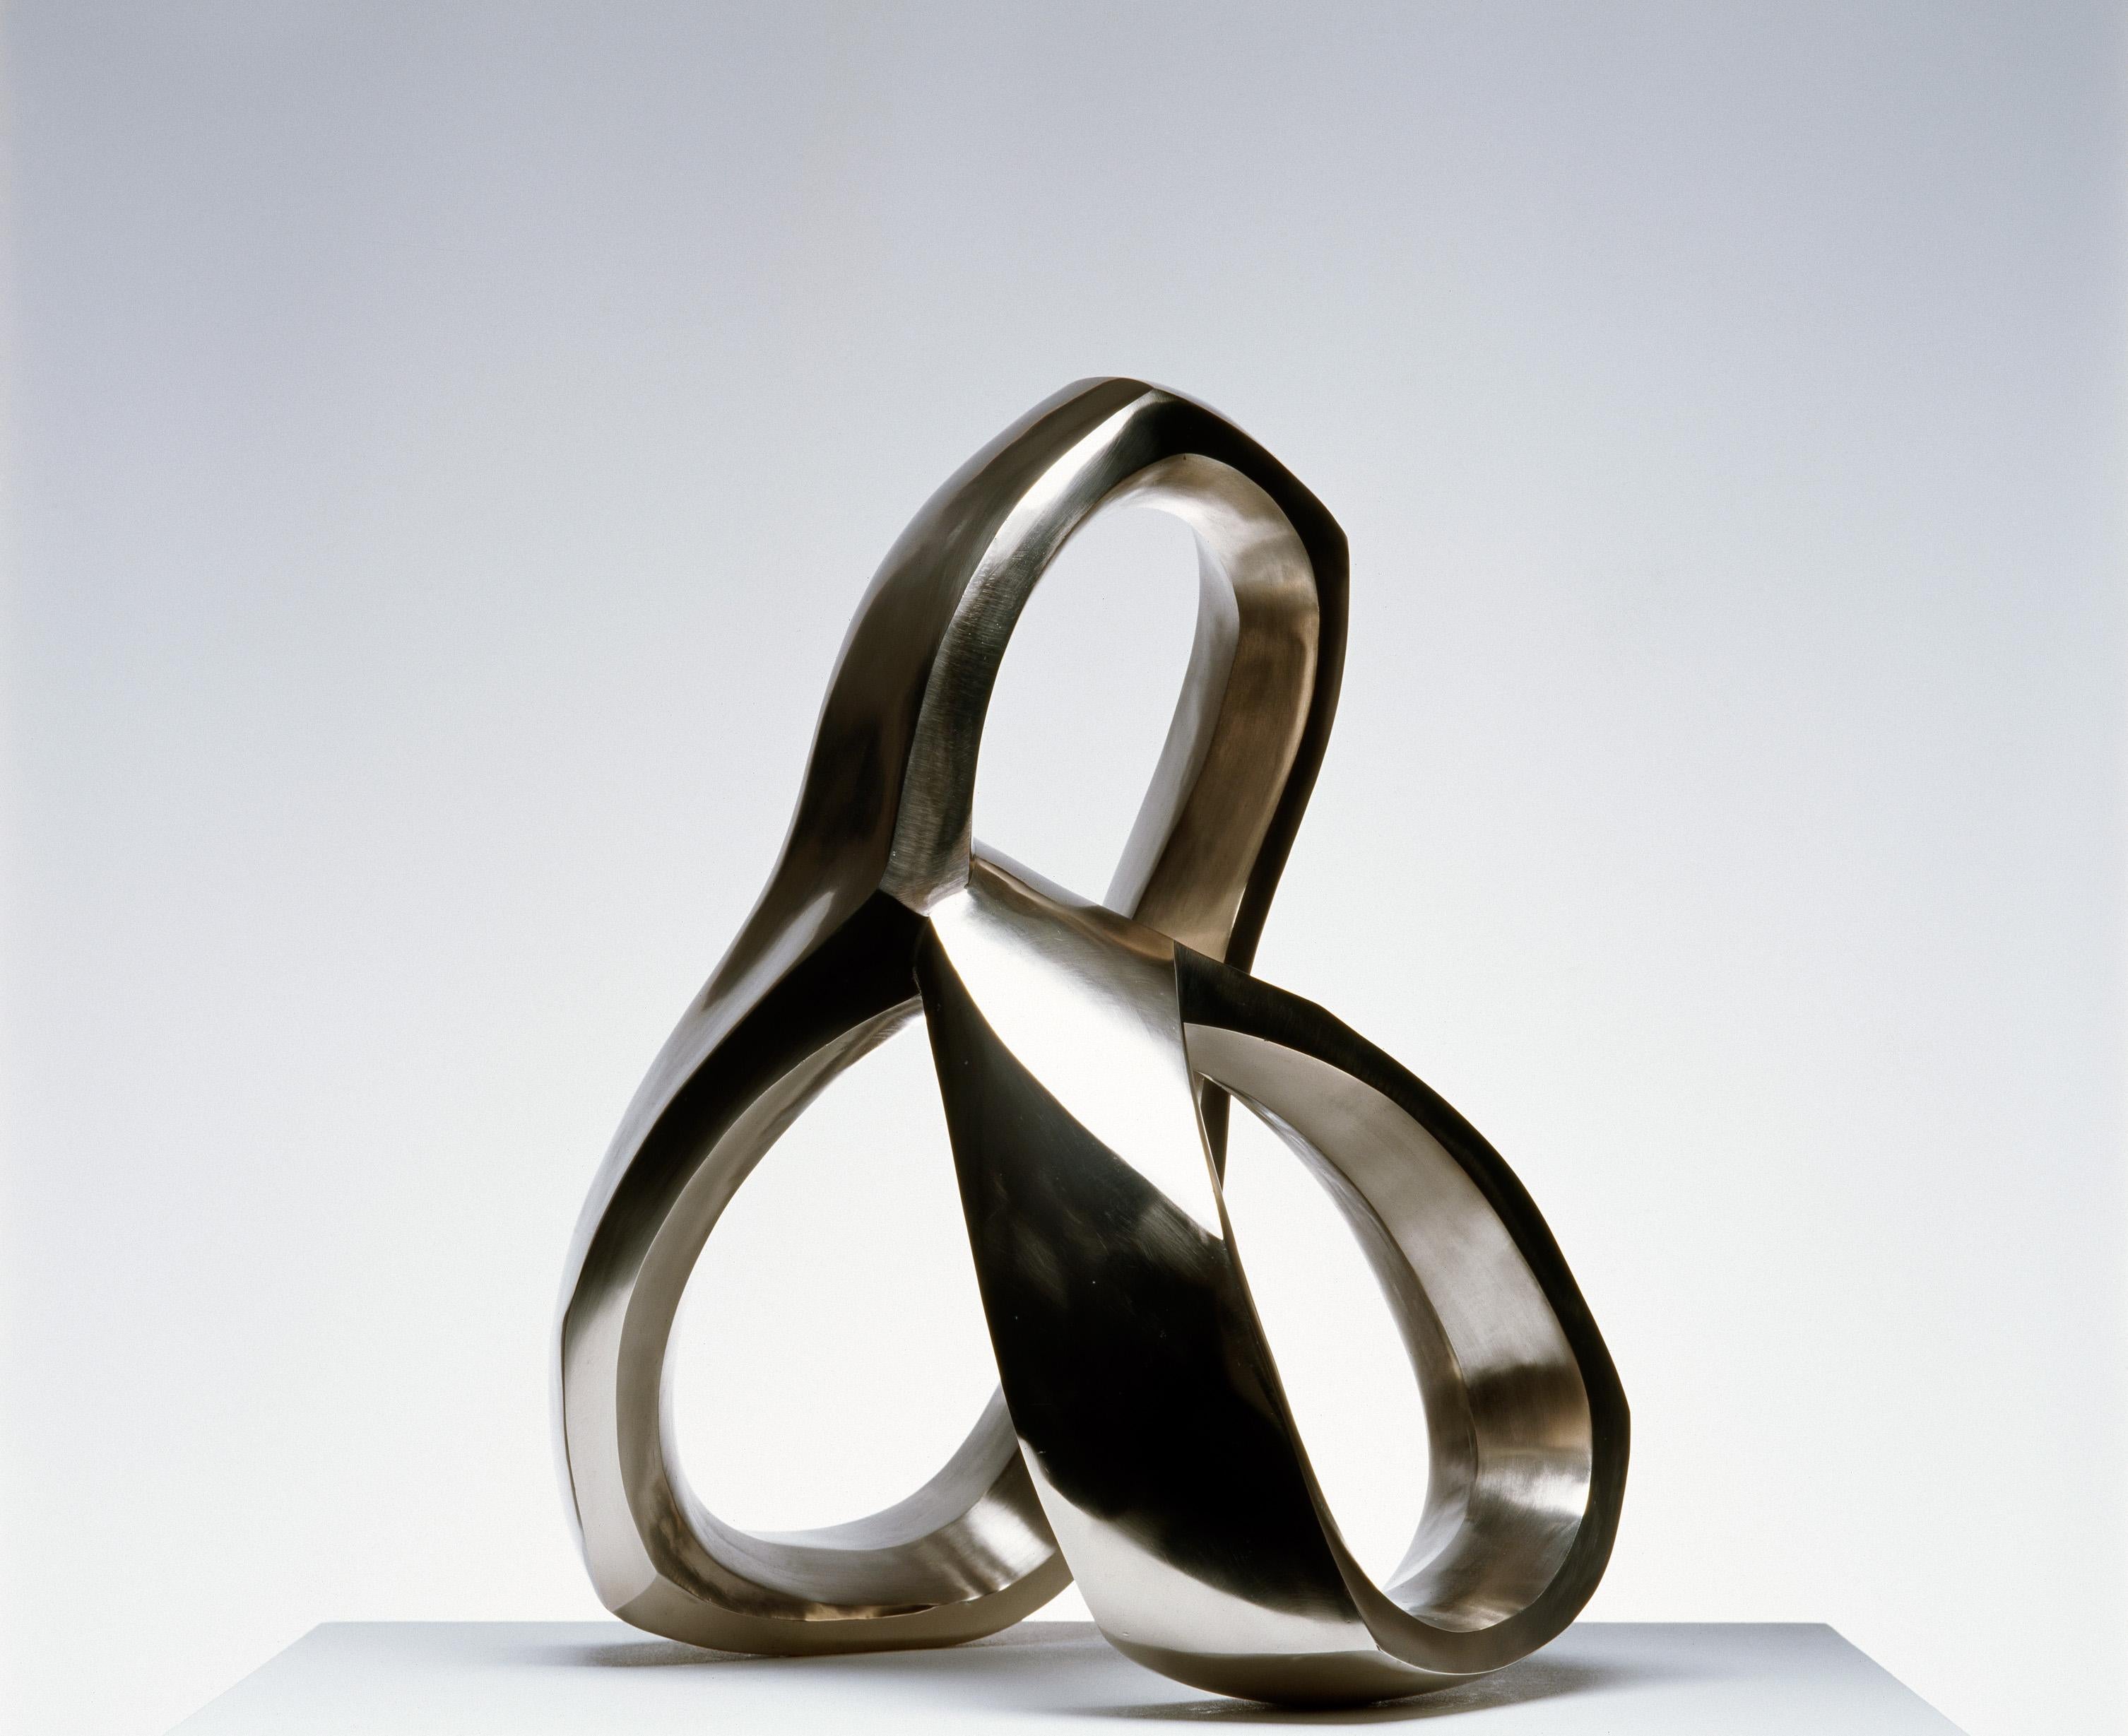 Aluminum Sculpture 'Tatu' by Carola Eggeling 
Abstract sculpture with beautiful curved lines.

German aluminum sculpture
Numbered and signed artwork
Limited edition of 6
Measures: H. 56 x 47 x 37 cm
Lead time: 8 weeks  

Eggeling's are pure forms,